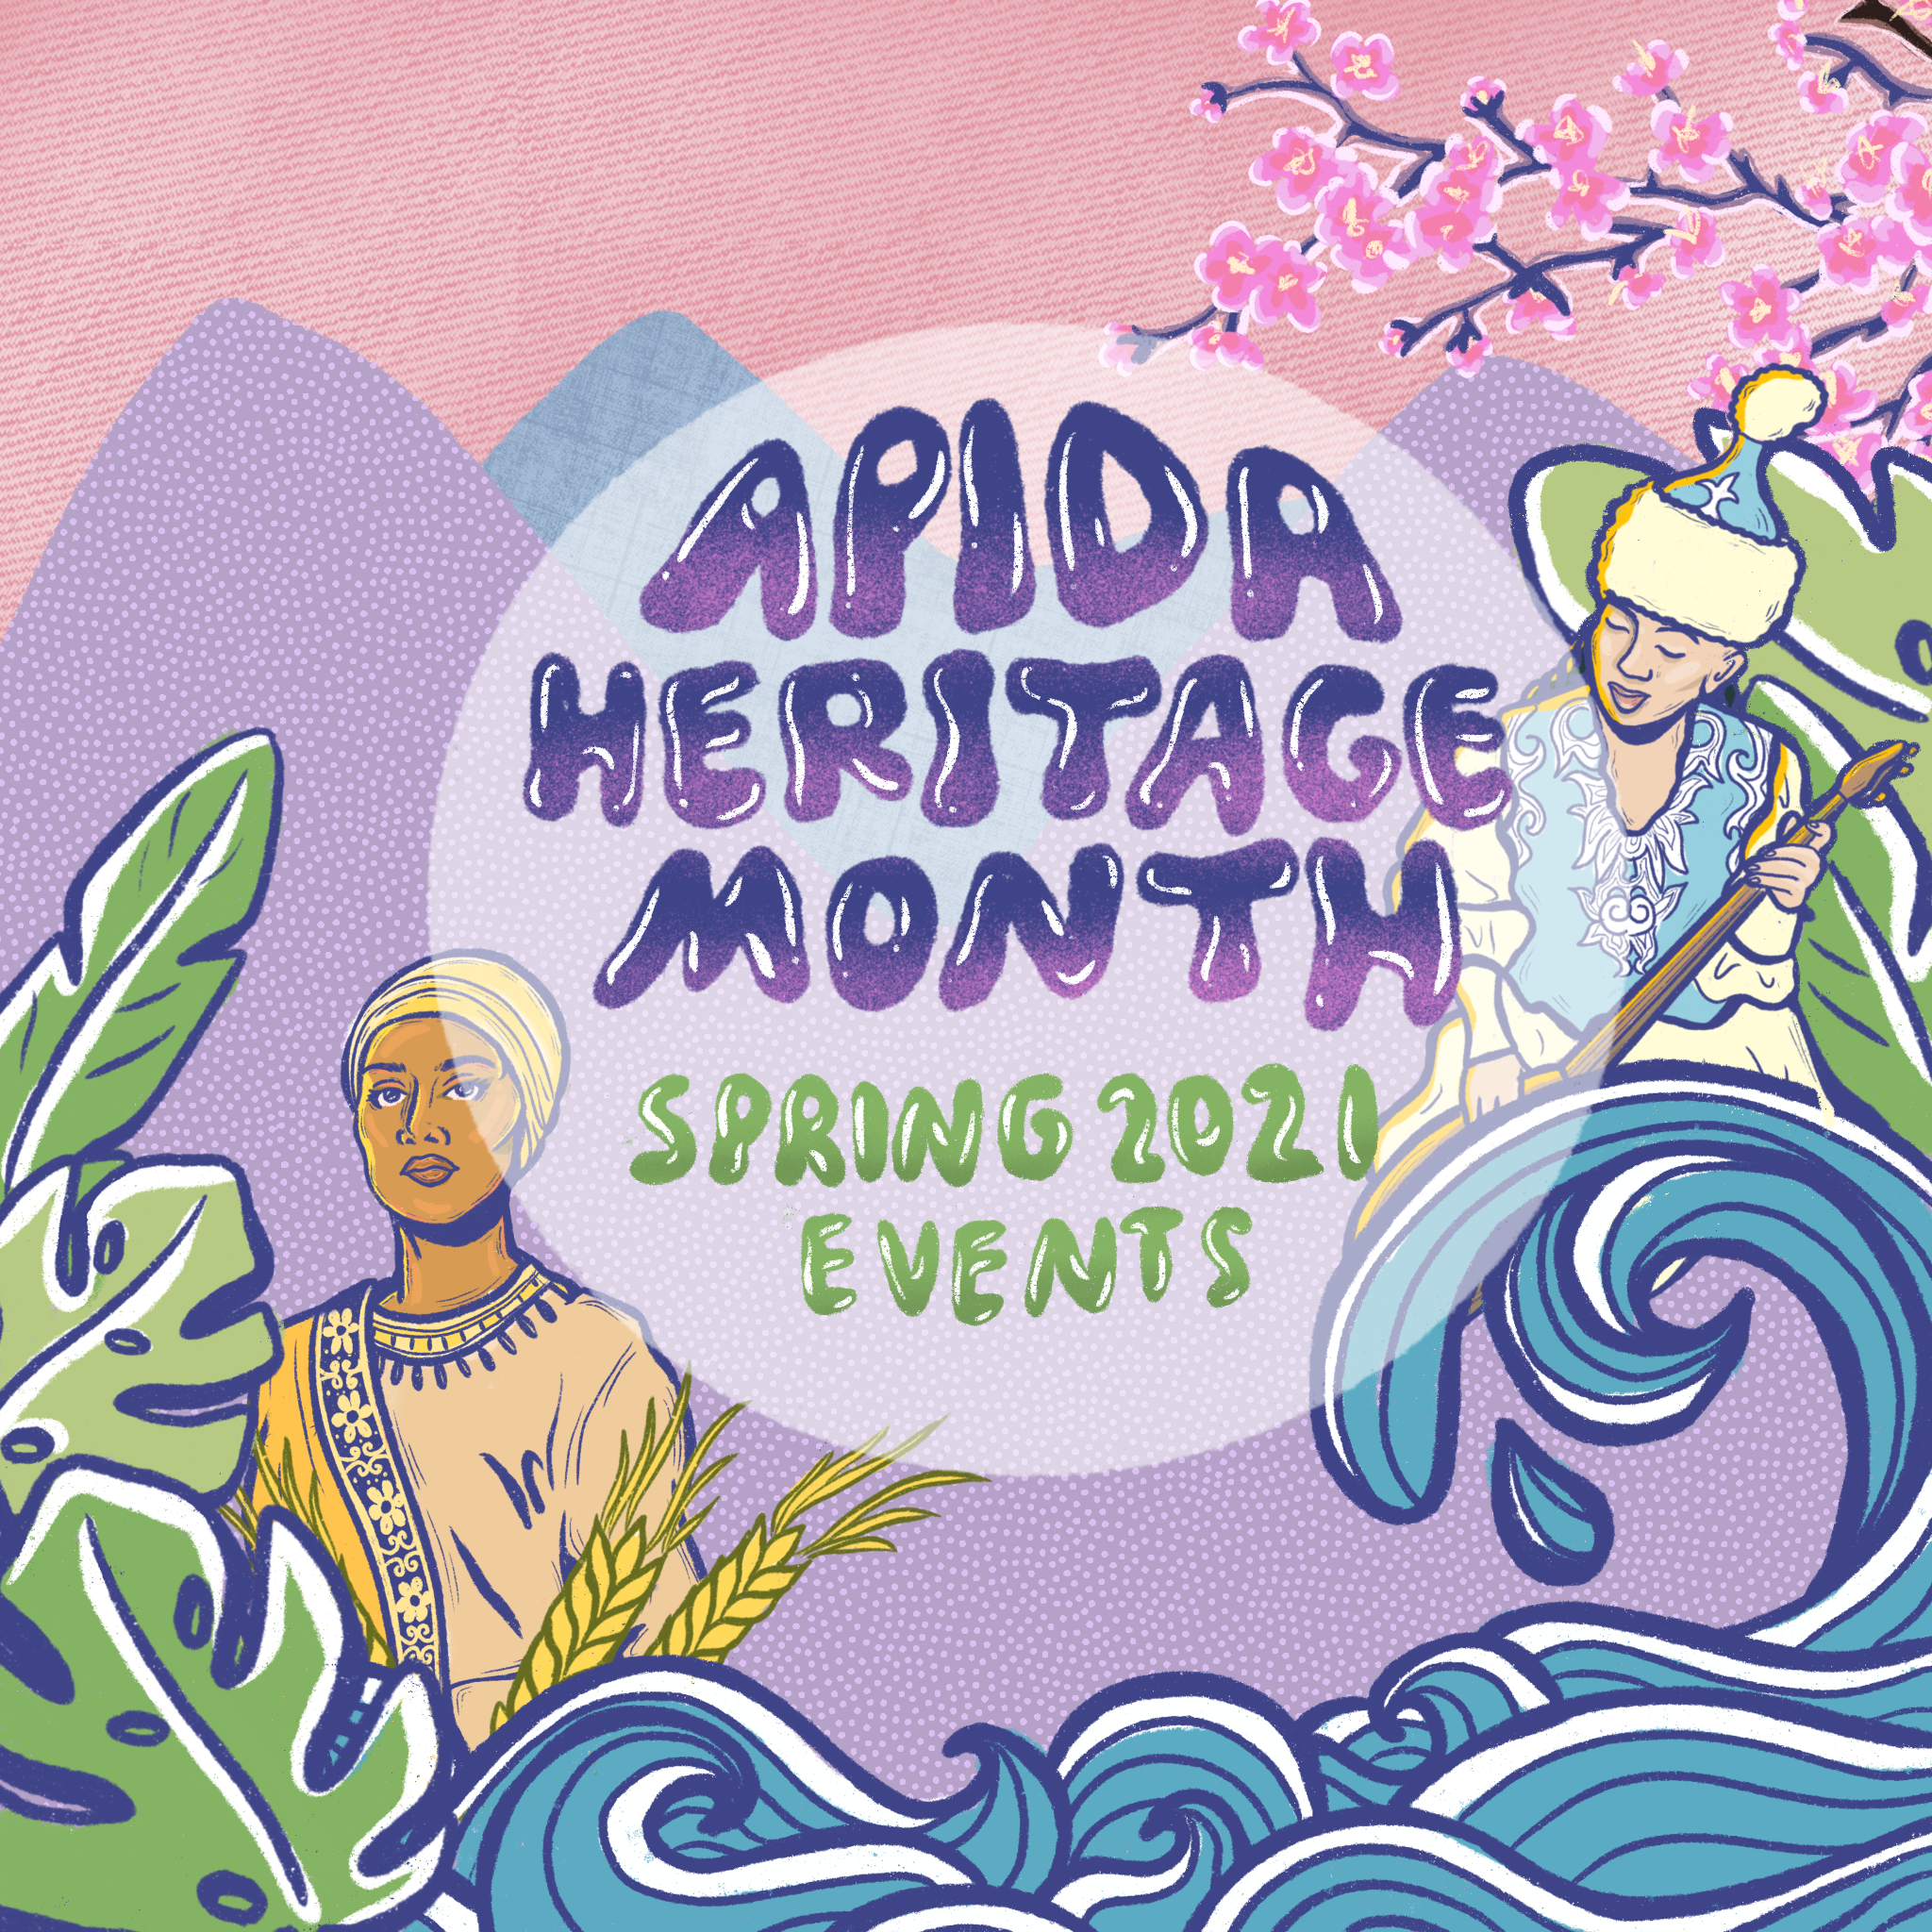 ADIPA Heritage Month Spring 2021 Events